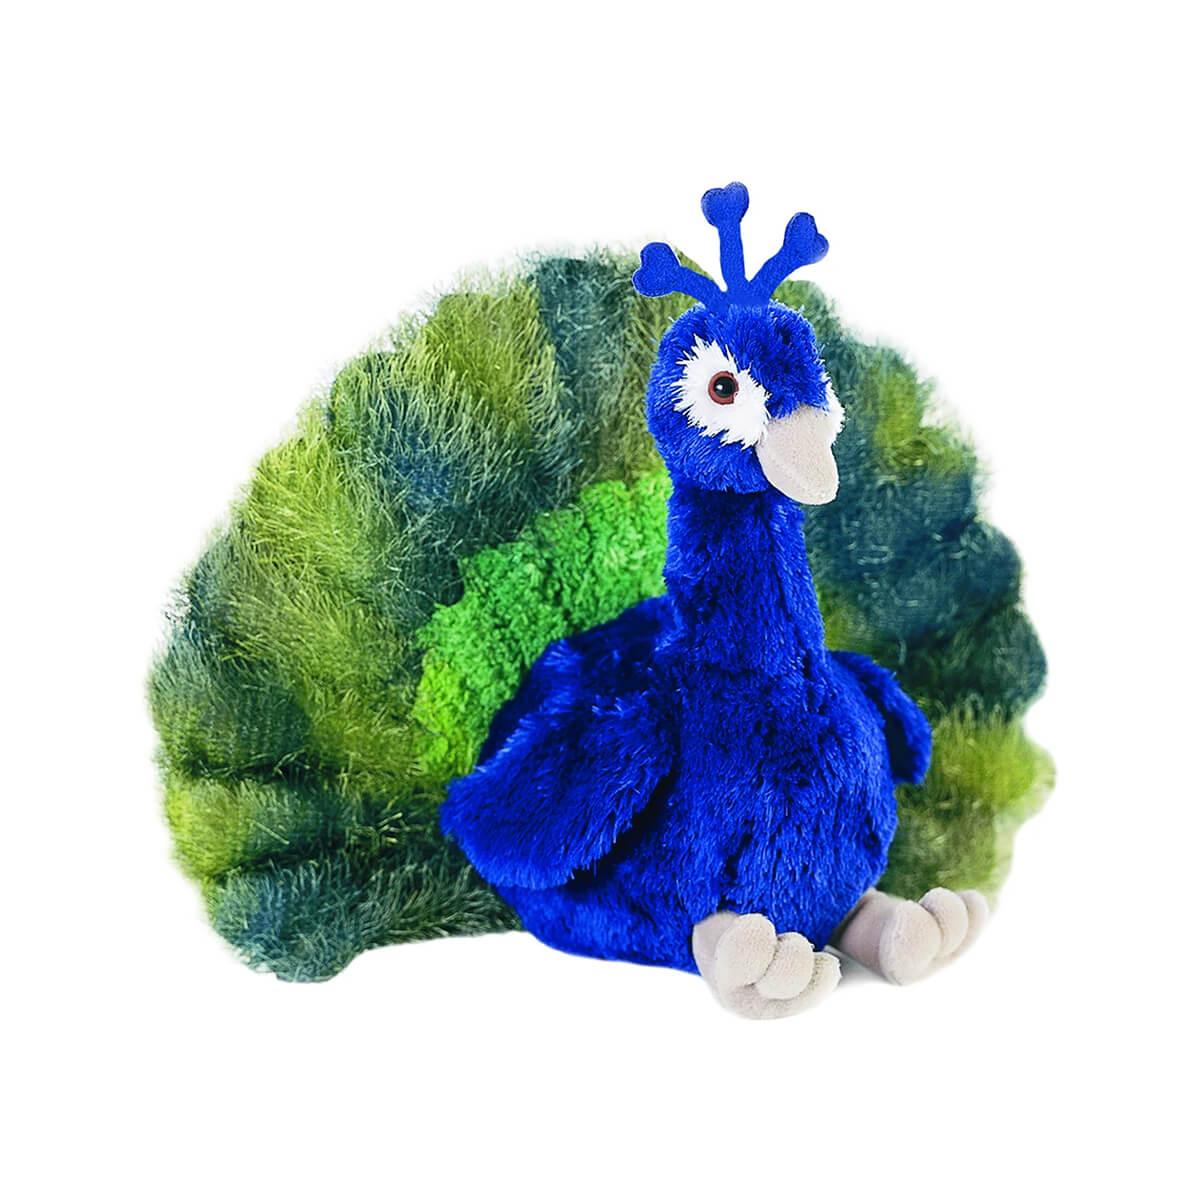  Perry The Peacock Plush Toy